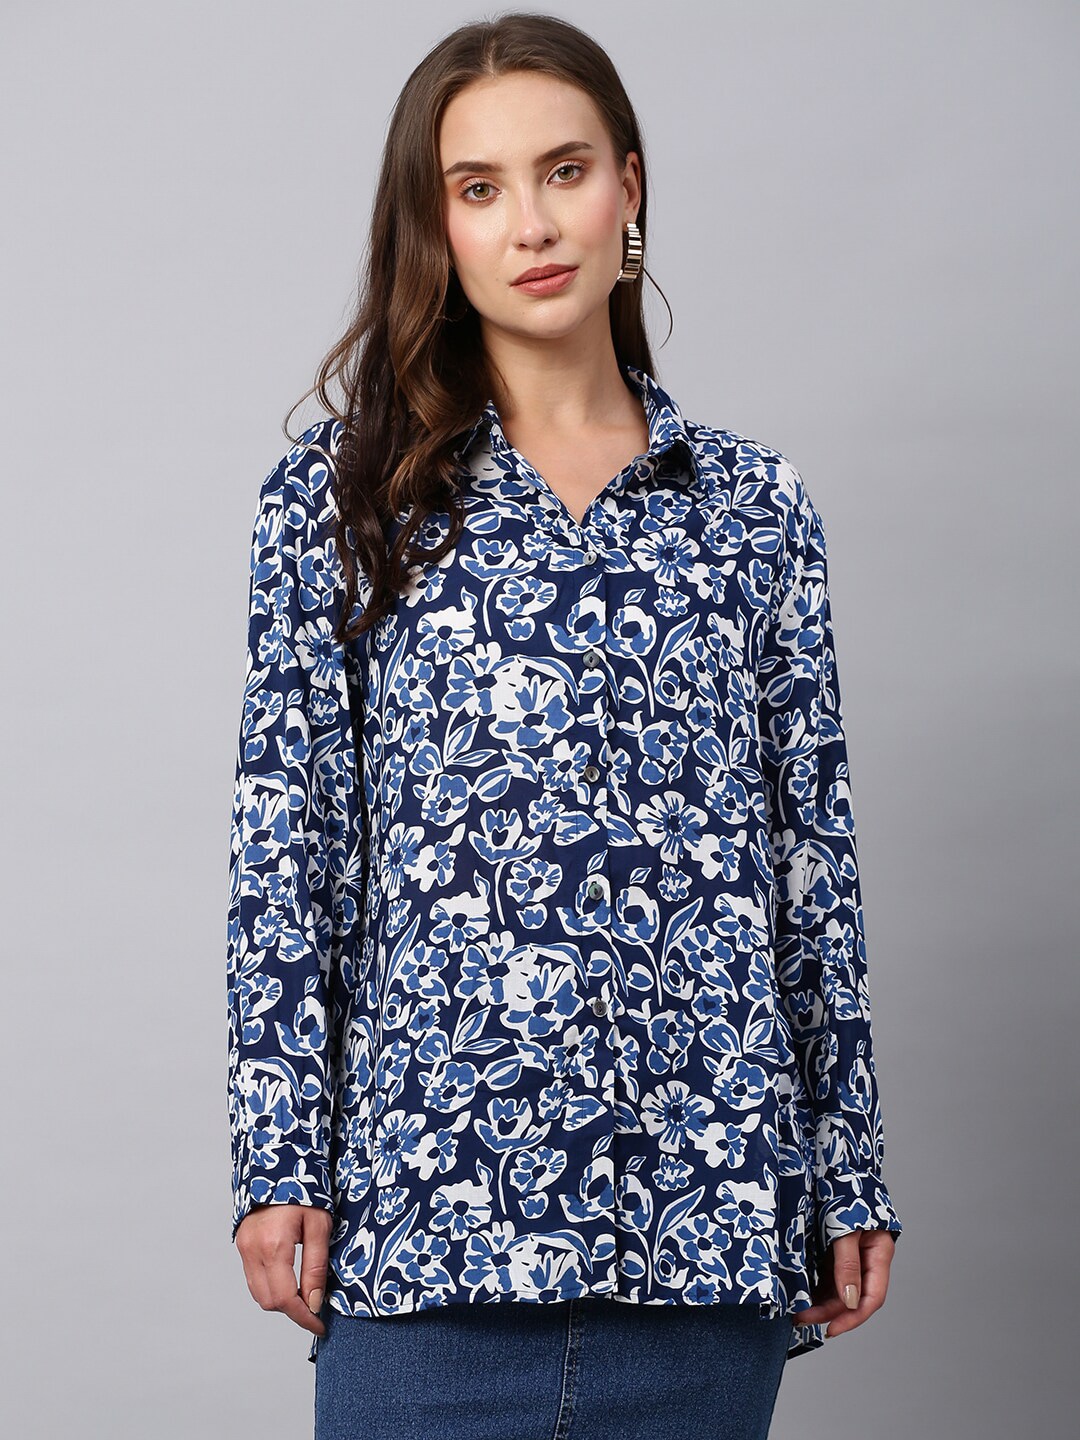 Chemistry Floral Printed Shirt Style Top Price in India